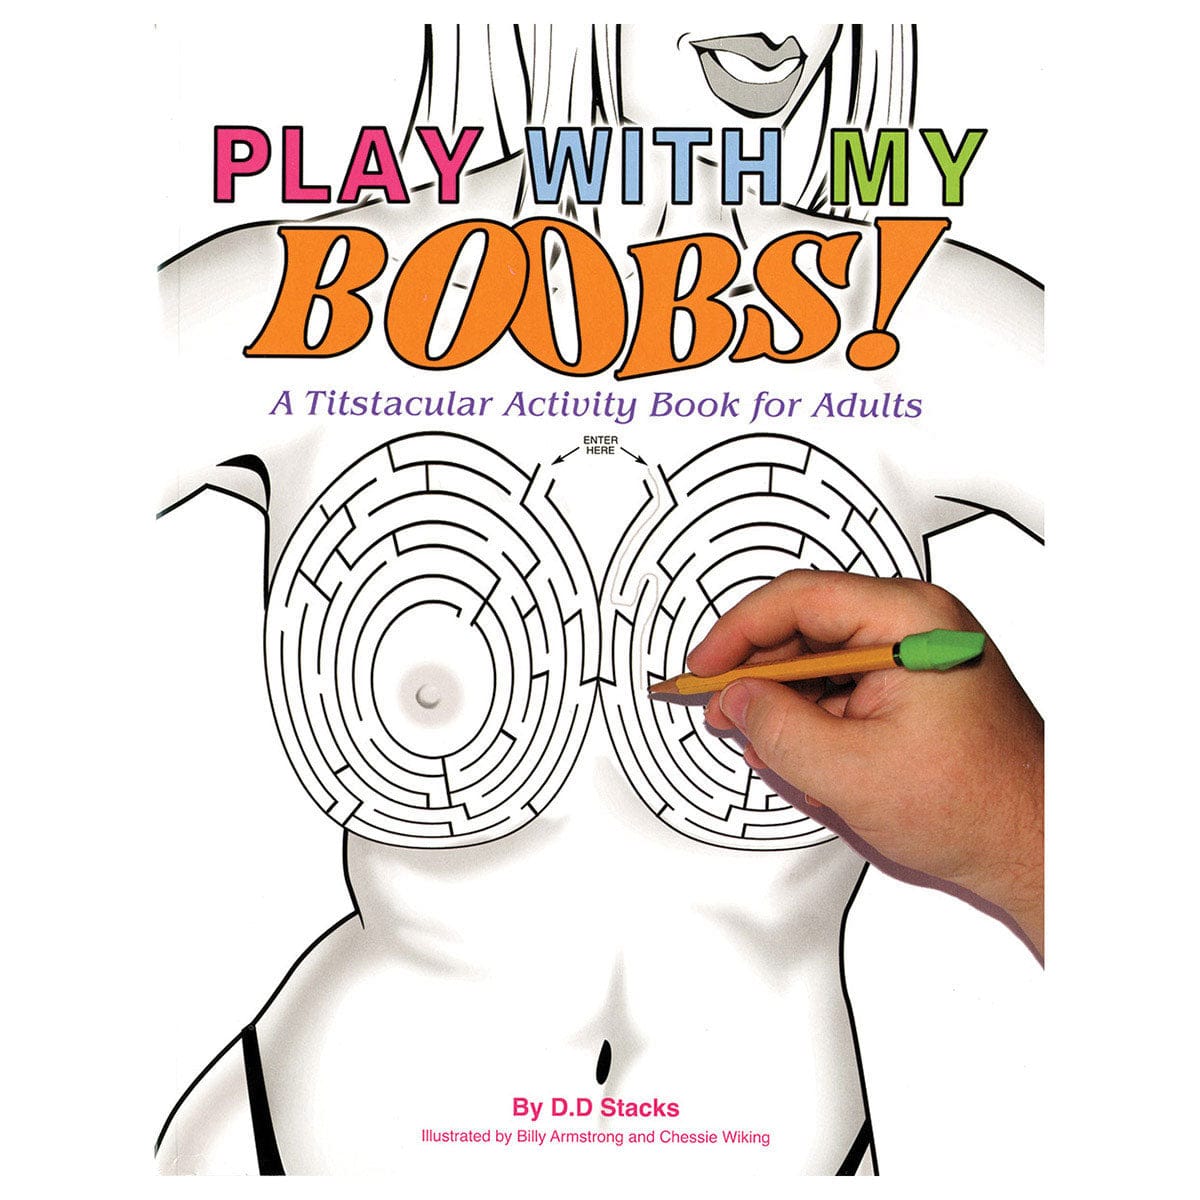 Play with My Boobs! A Titstacular Activity Book for Adults by Aaron Blake Publishers - rolik